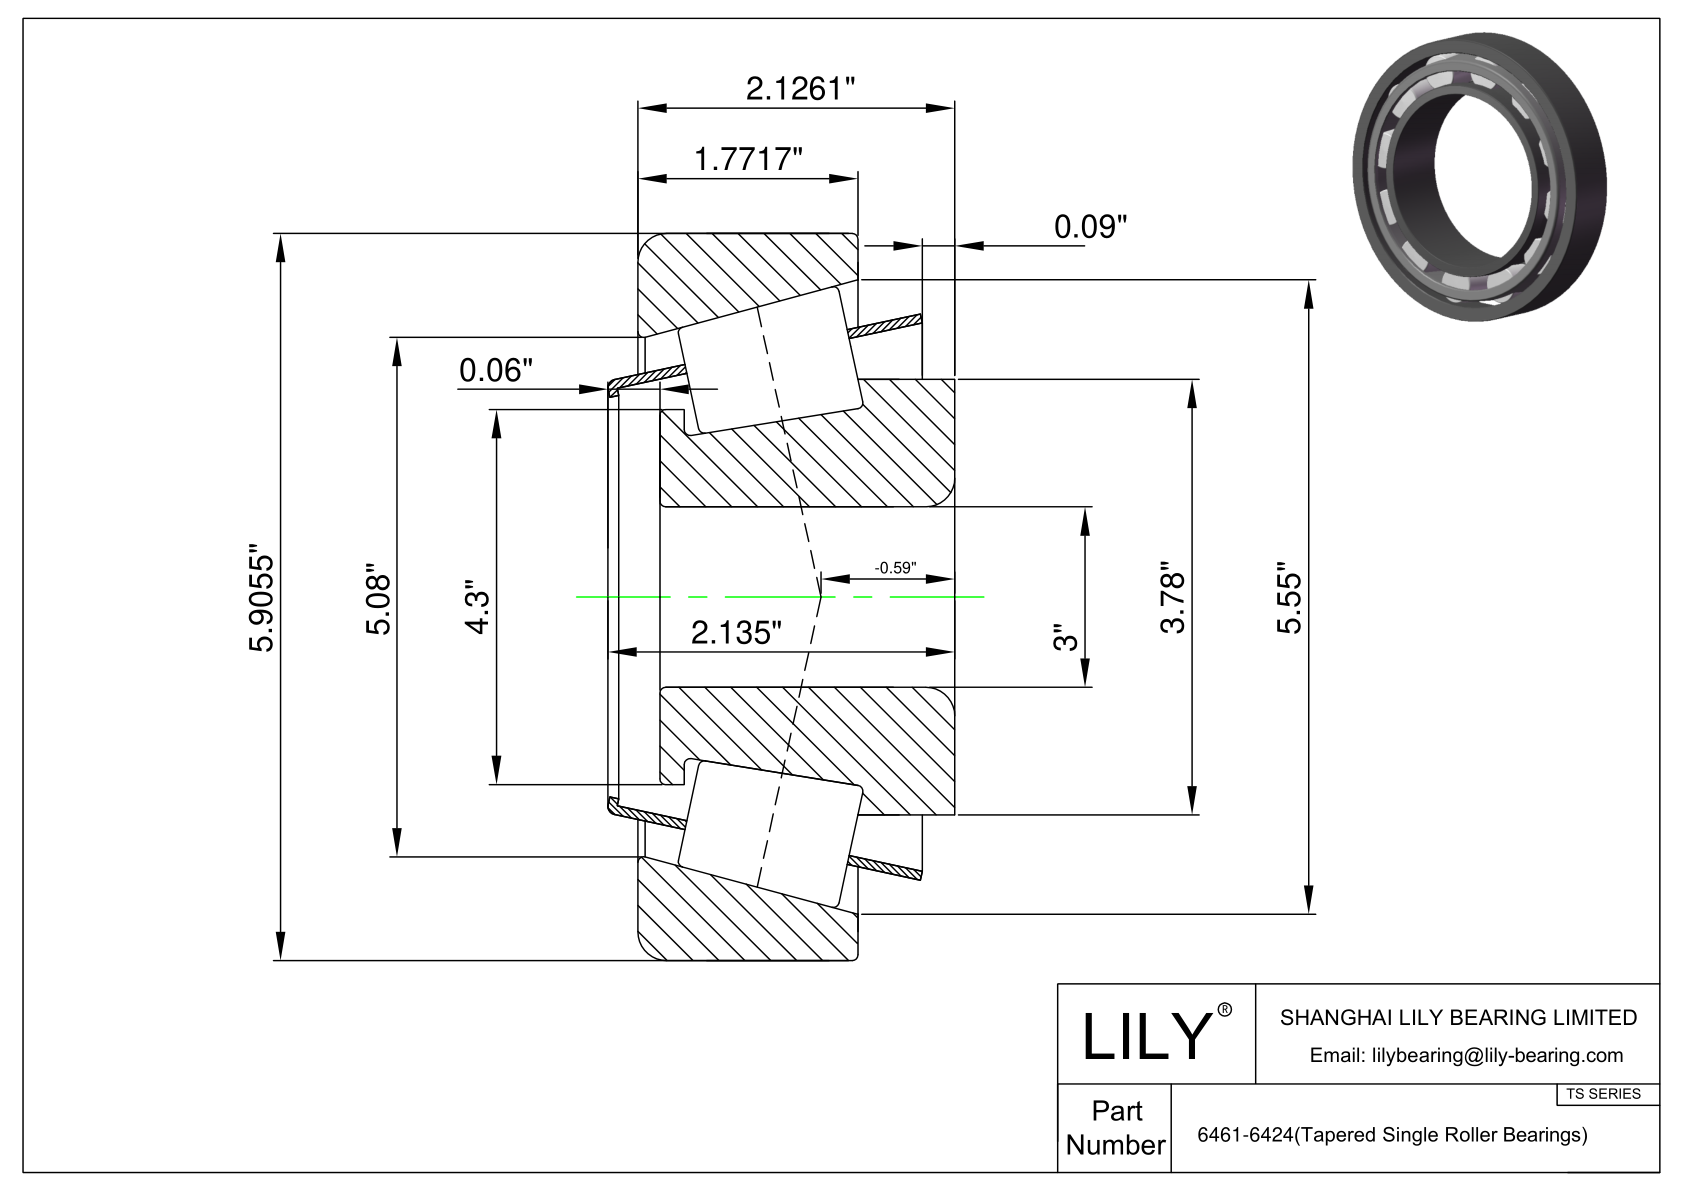 6461-6424 TS (Tapered Single Roller Bearings) (Imperial) cad drawing